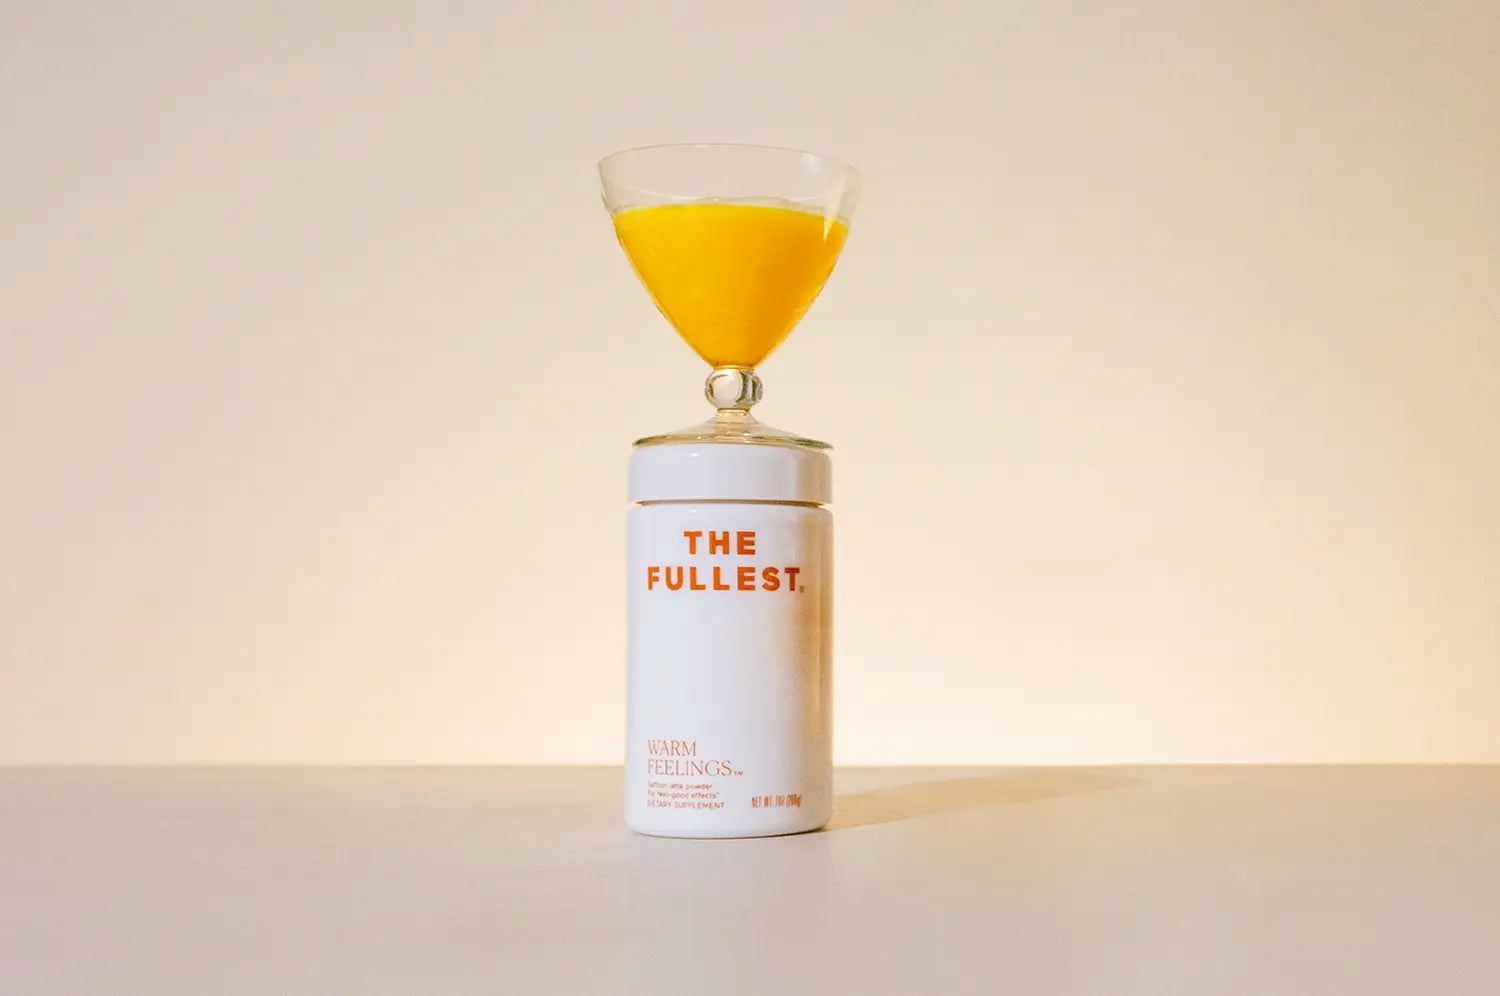 A glass of a saffron beverage balanced on top of it's white container labeled "the fullest" against a pale background.